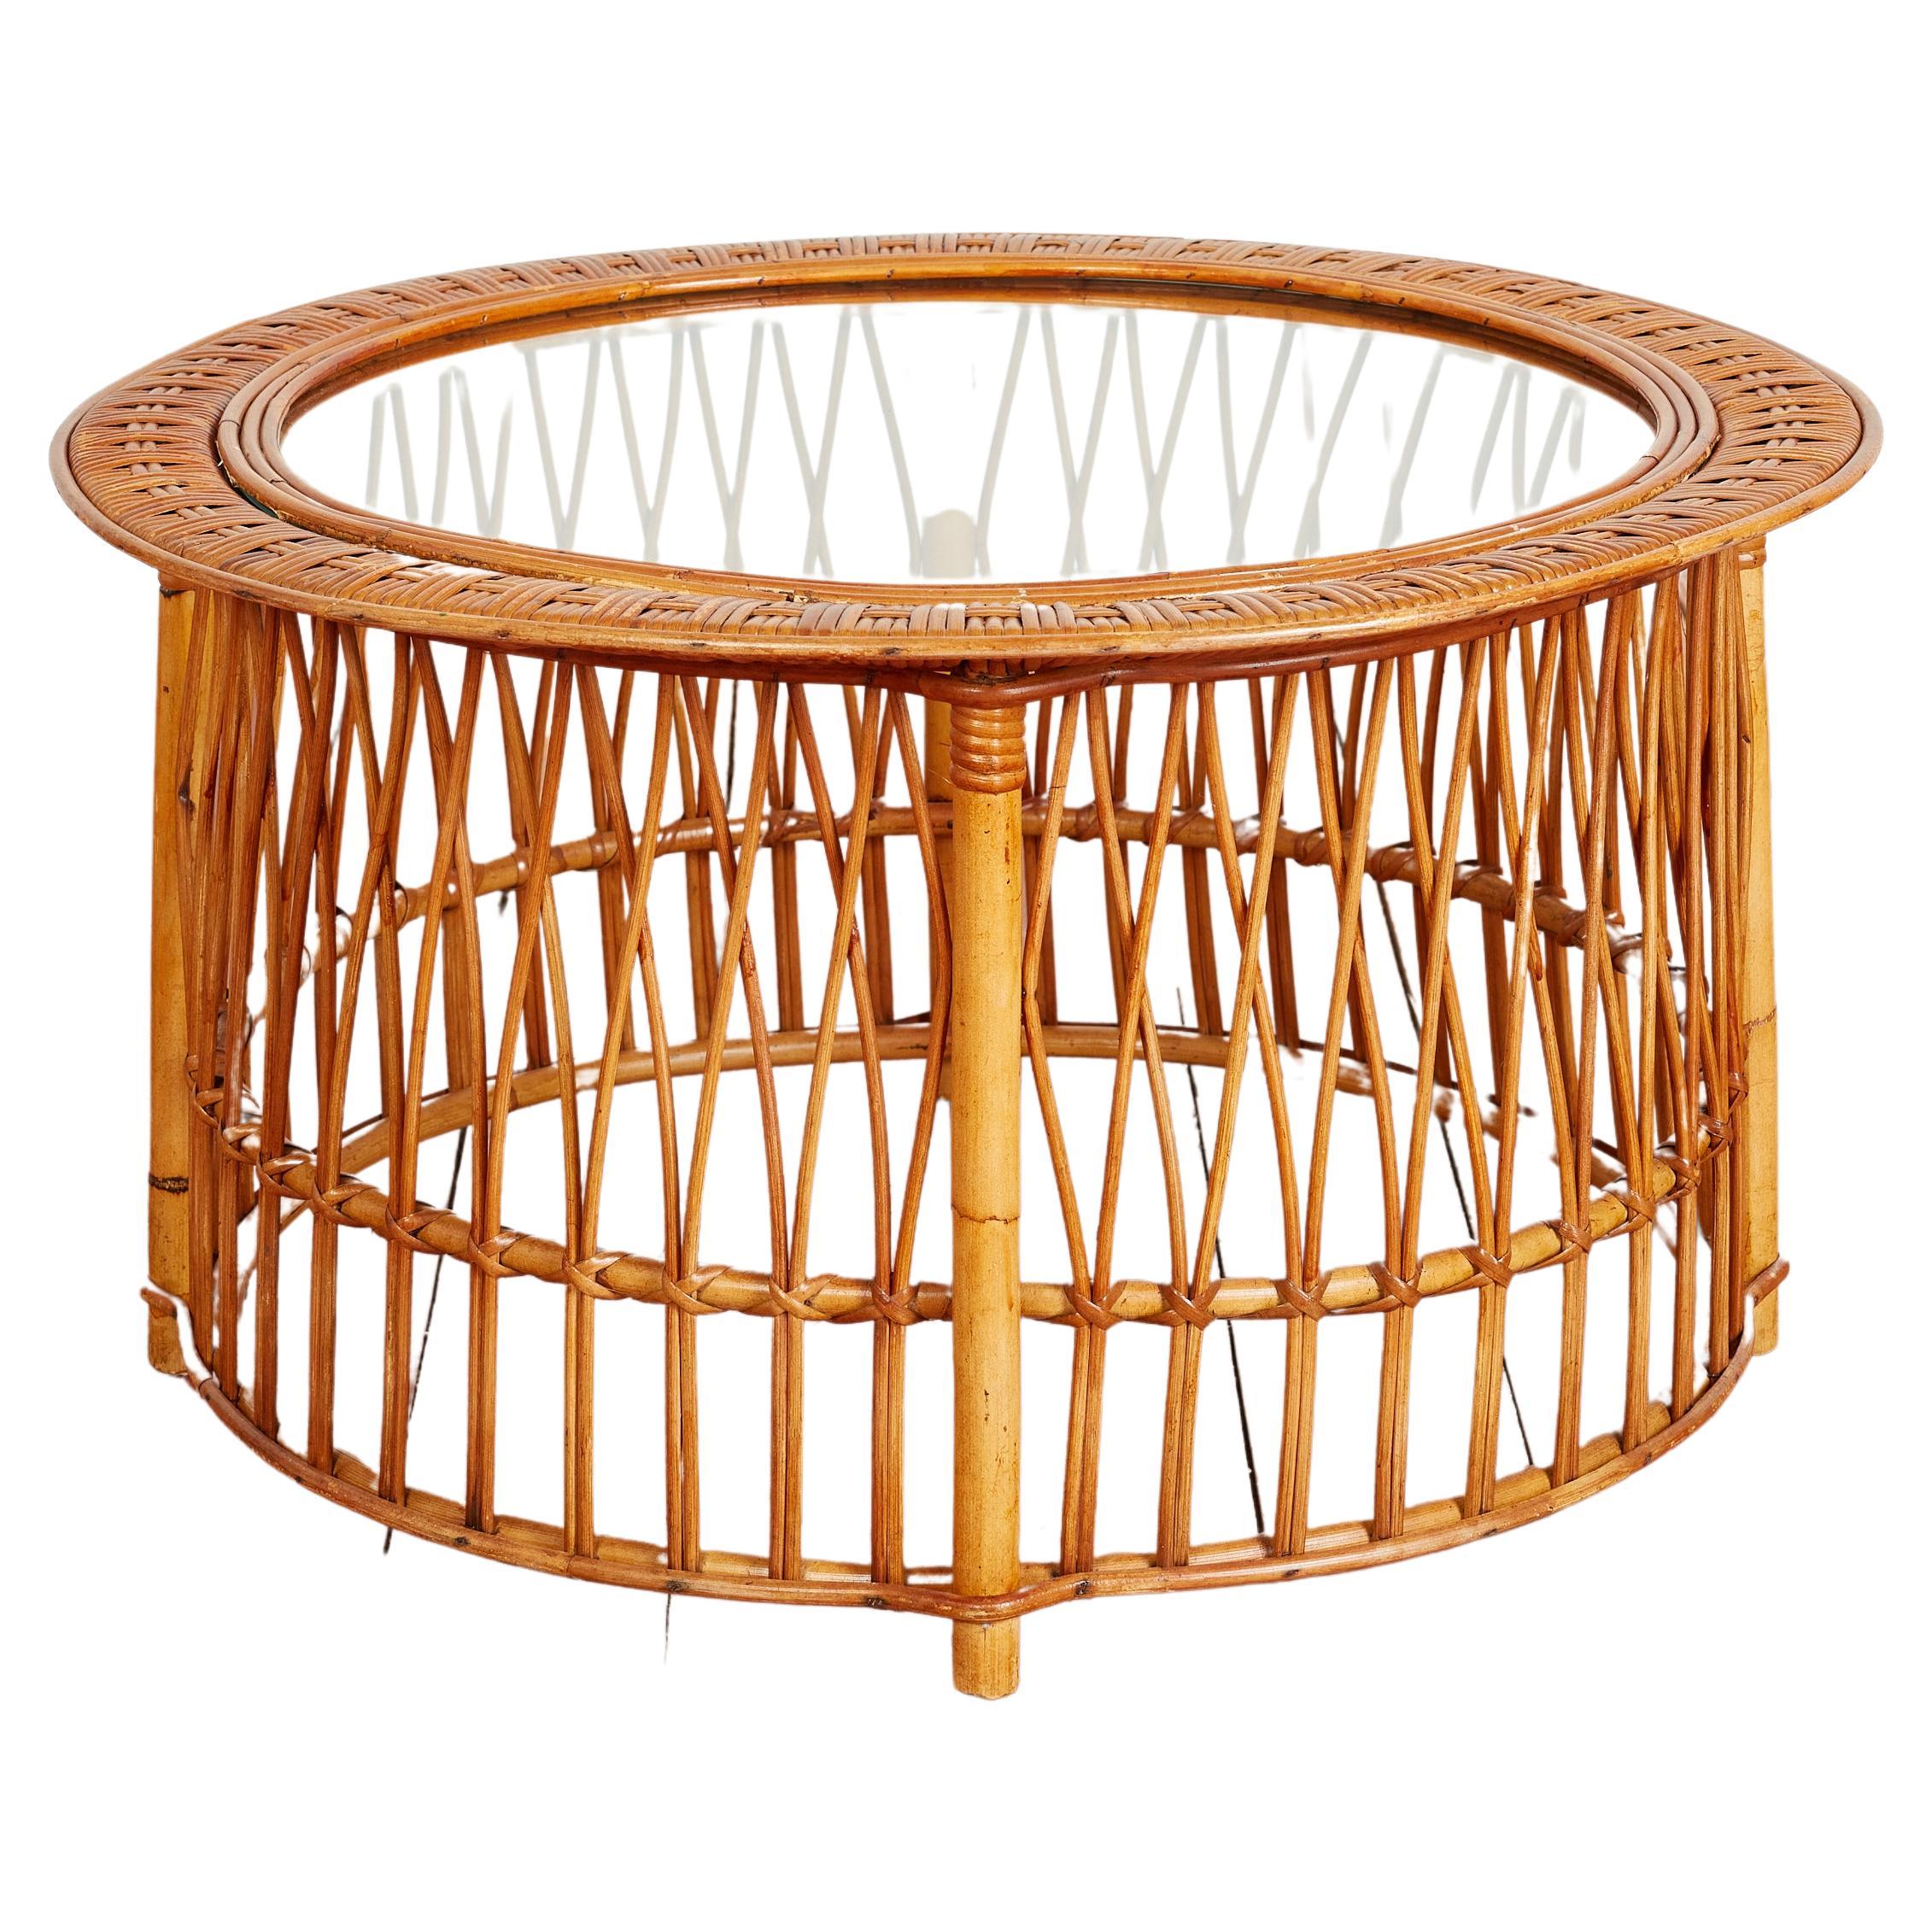 1960's Italian bamboo coffee table with glass top and drum shape. 
Attributed to Boncaina - 
New glass 